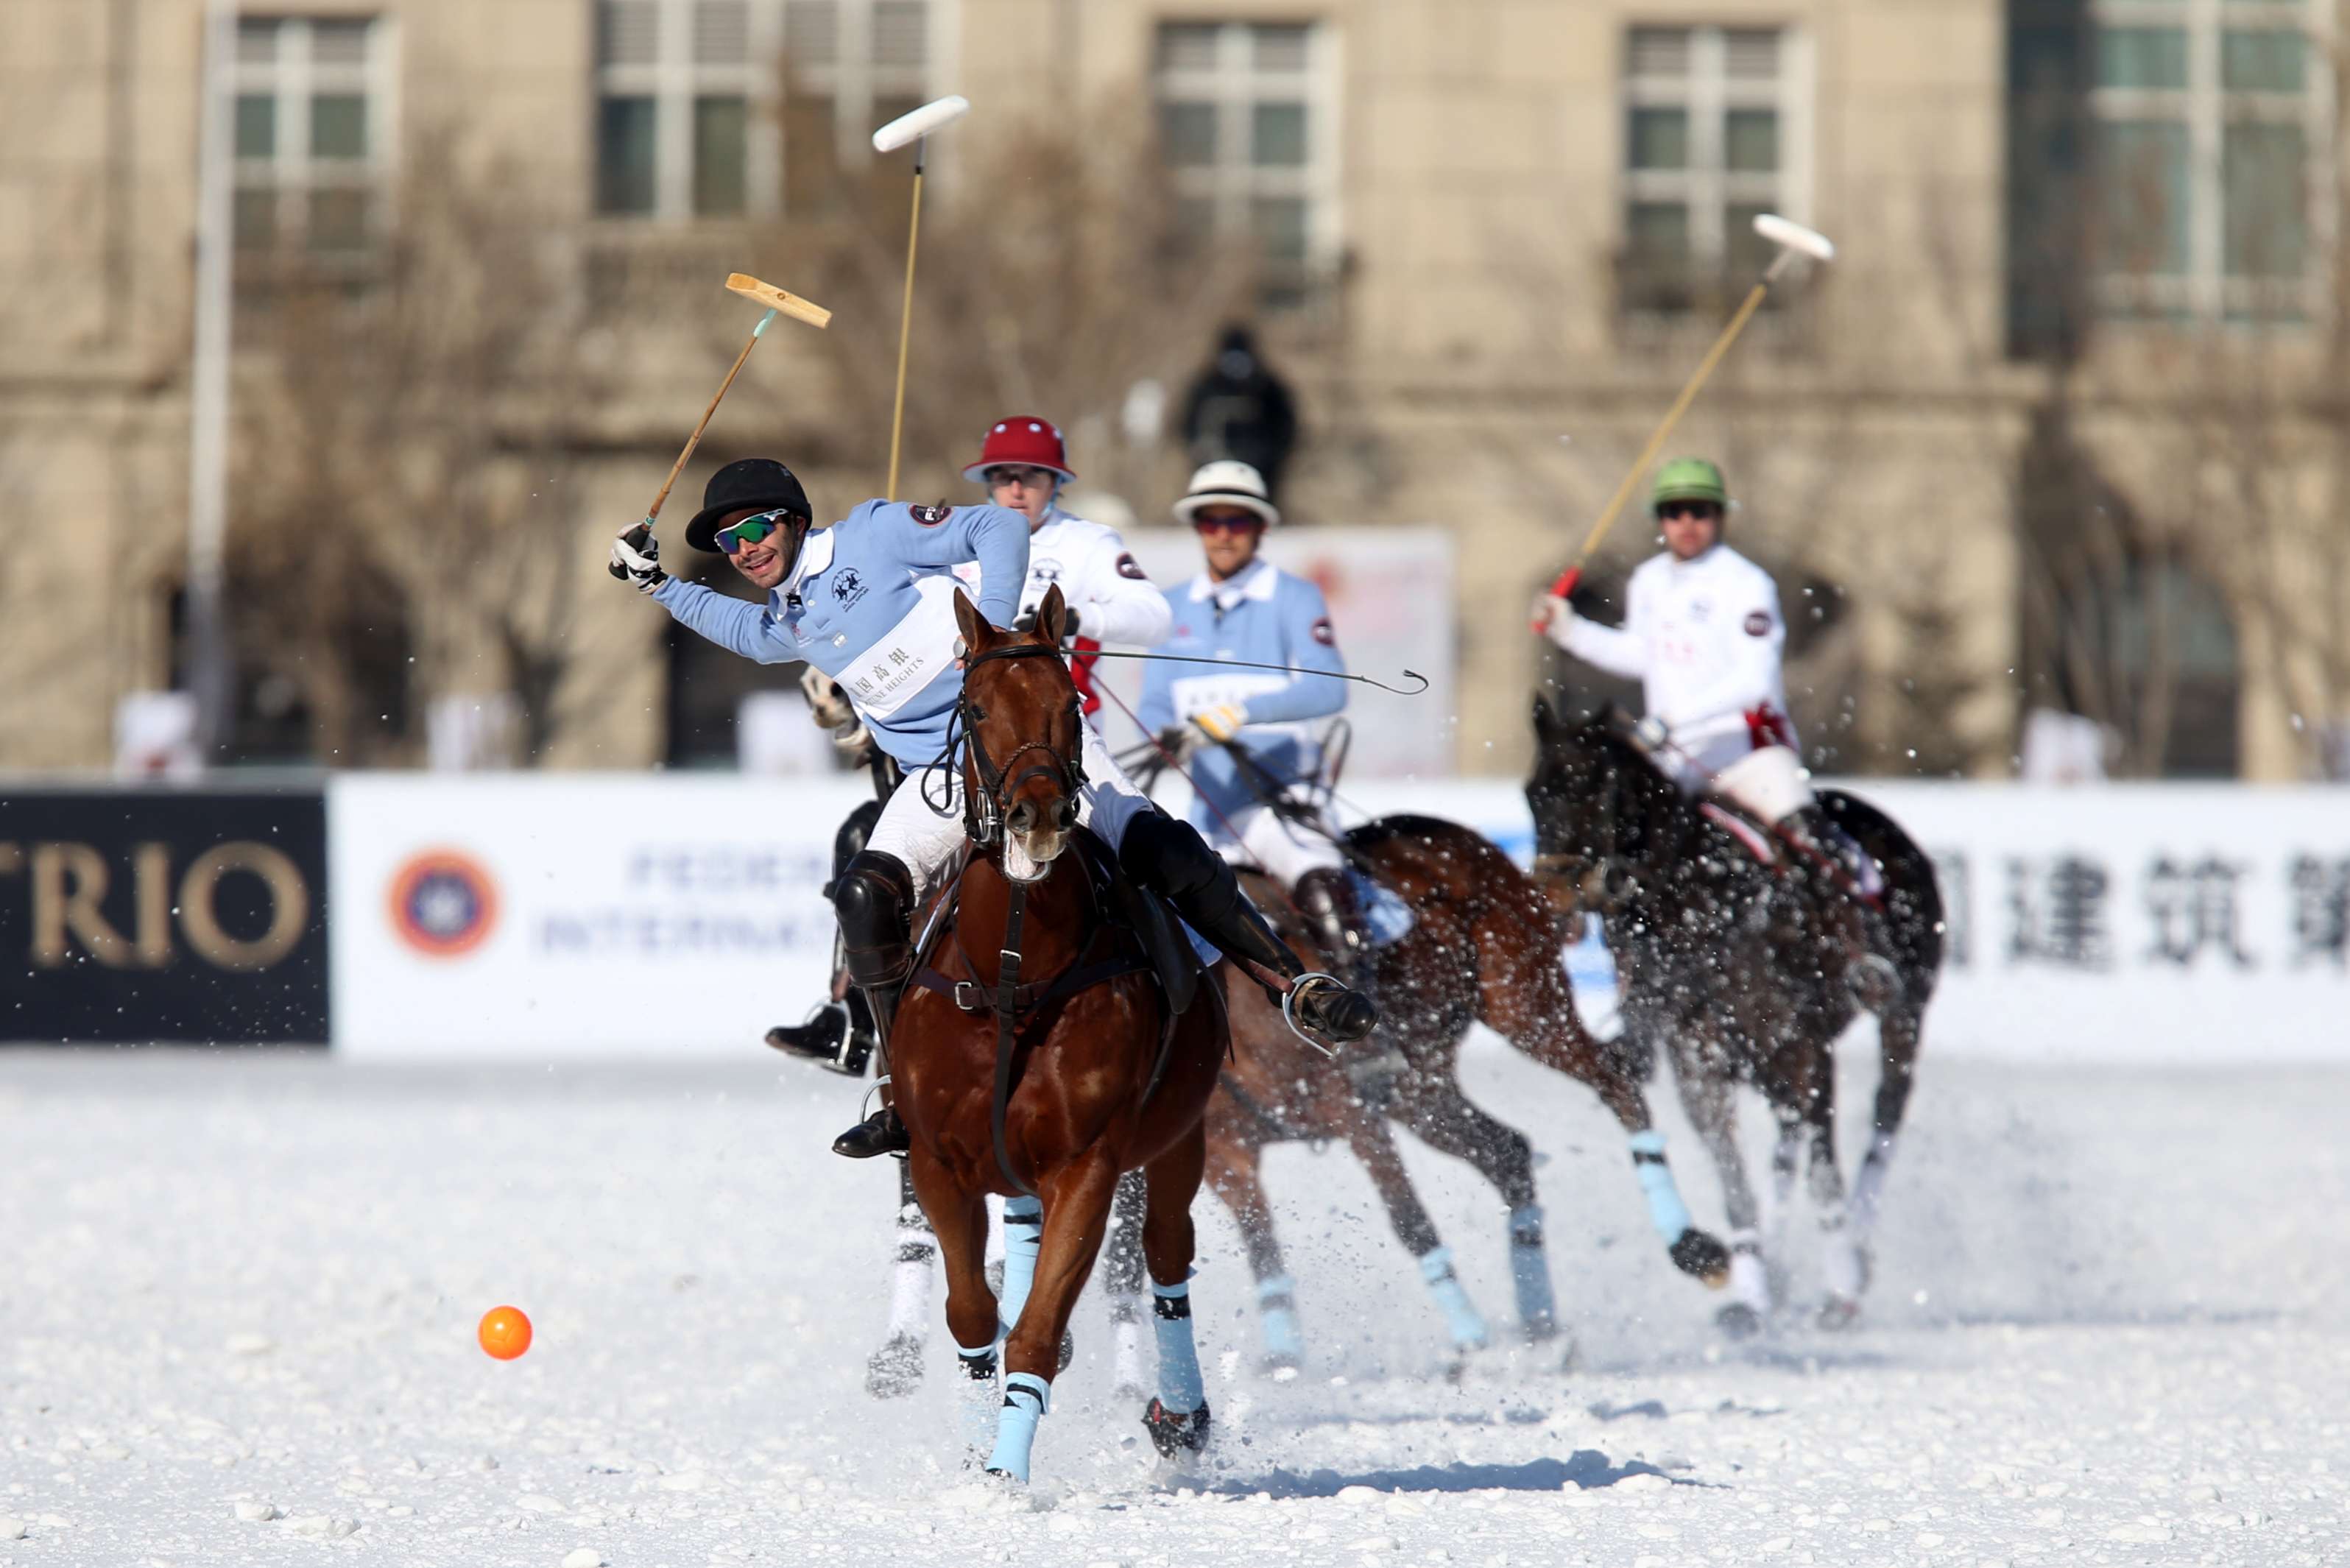 Players in action on day 3 of the Snow Polo World Cup 2015. Polo, one of the world’s oldest games, is also one of its fastest – a moving polo ball can travel up to 117 kilometres per hour – and one of the world’s most dangerous